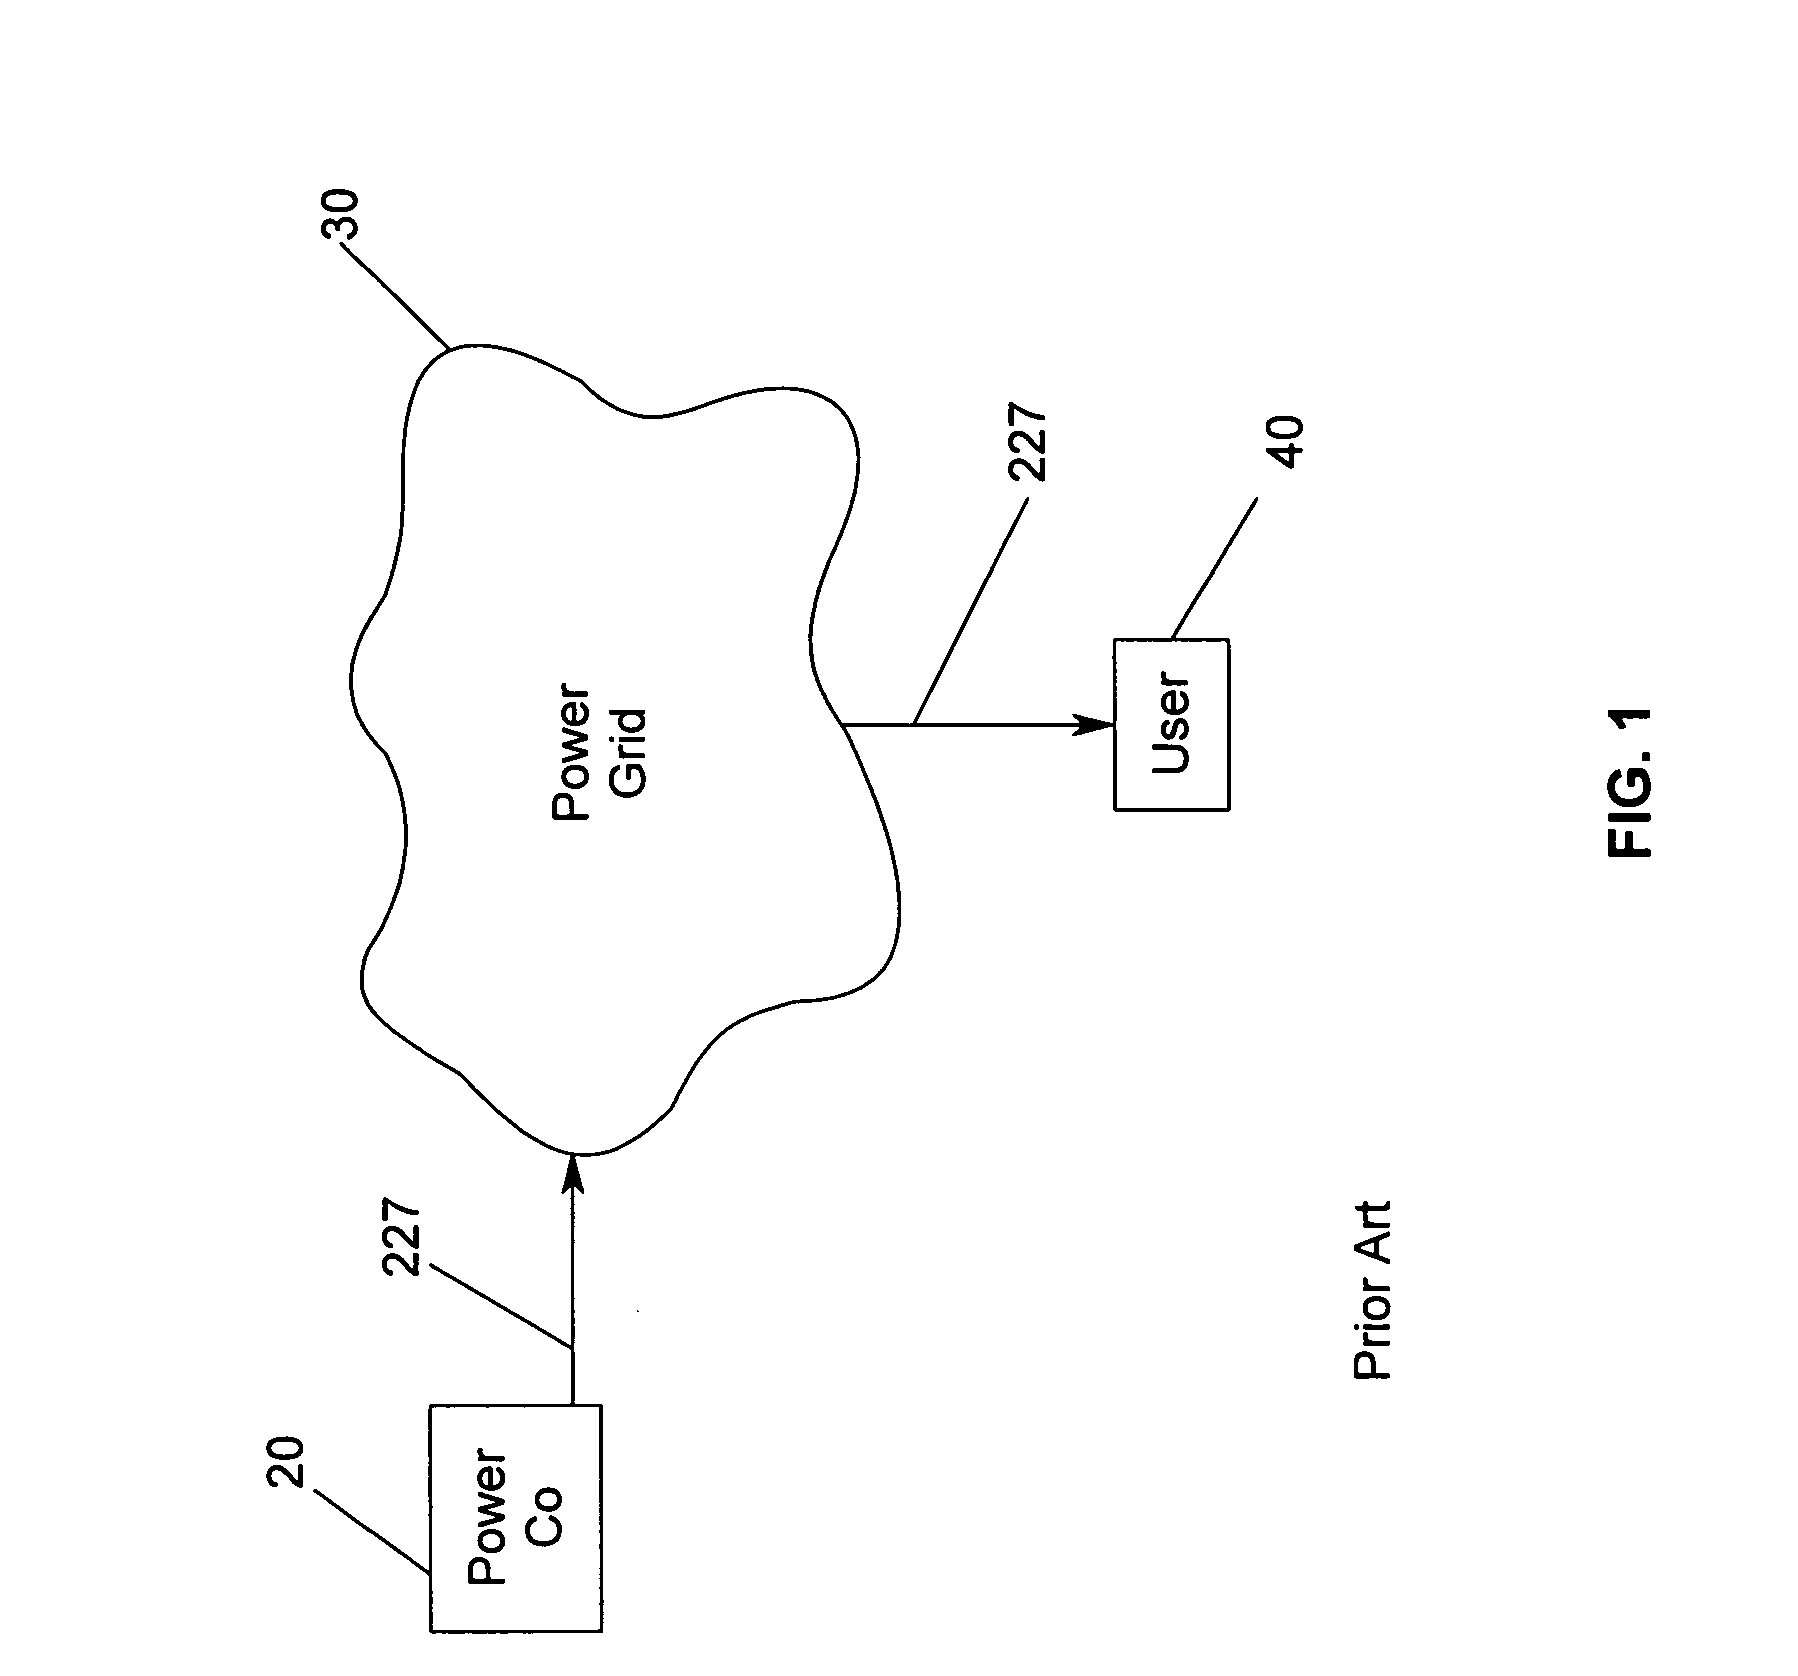 Electric power shuttling and management system, and method